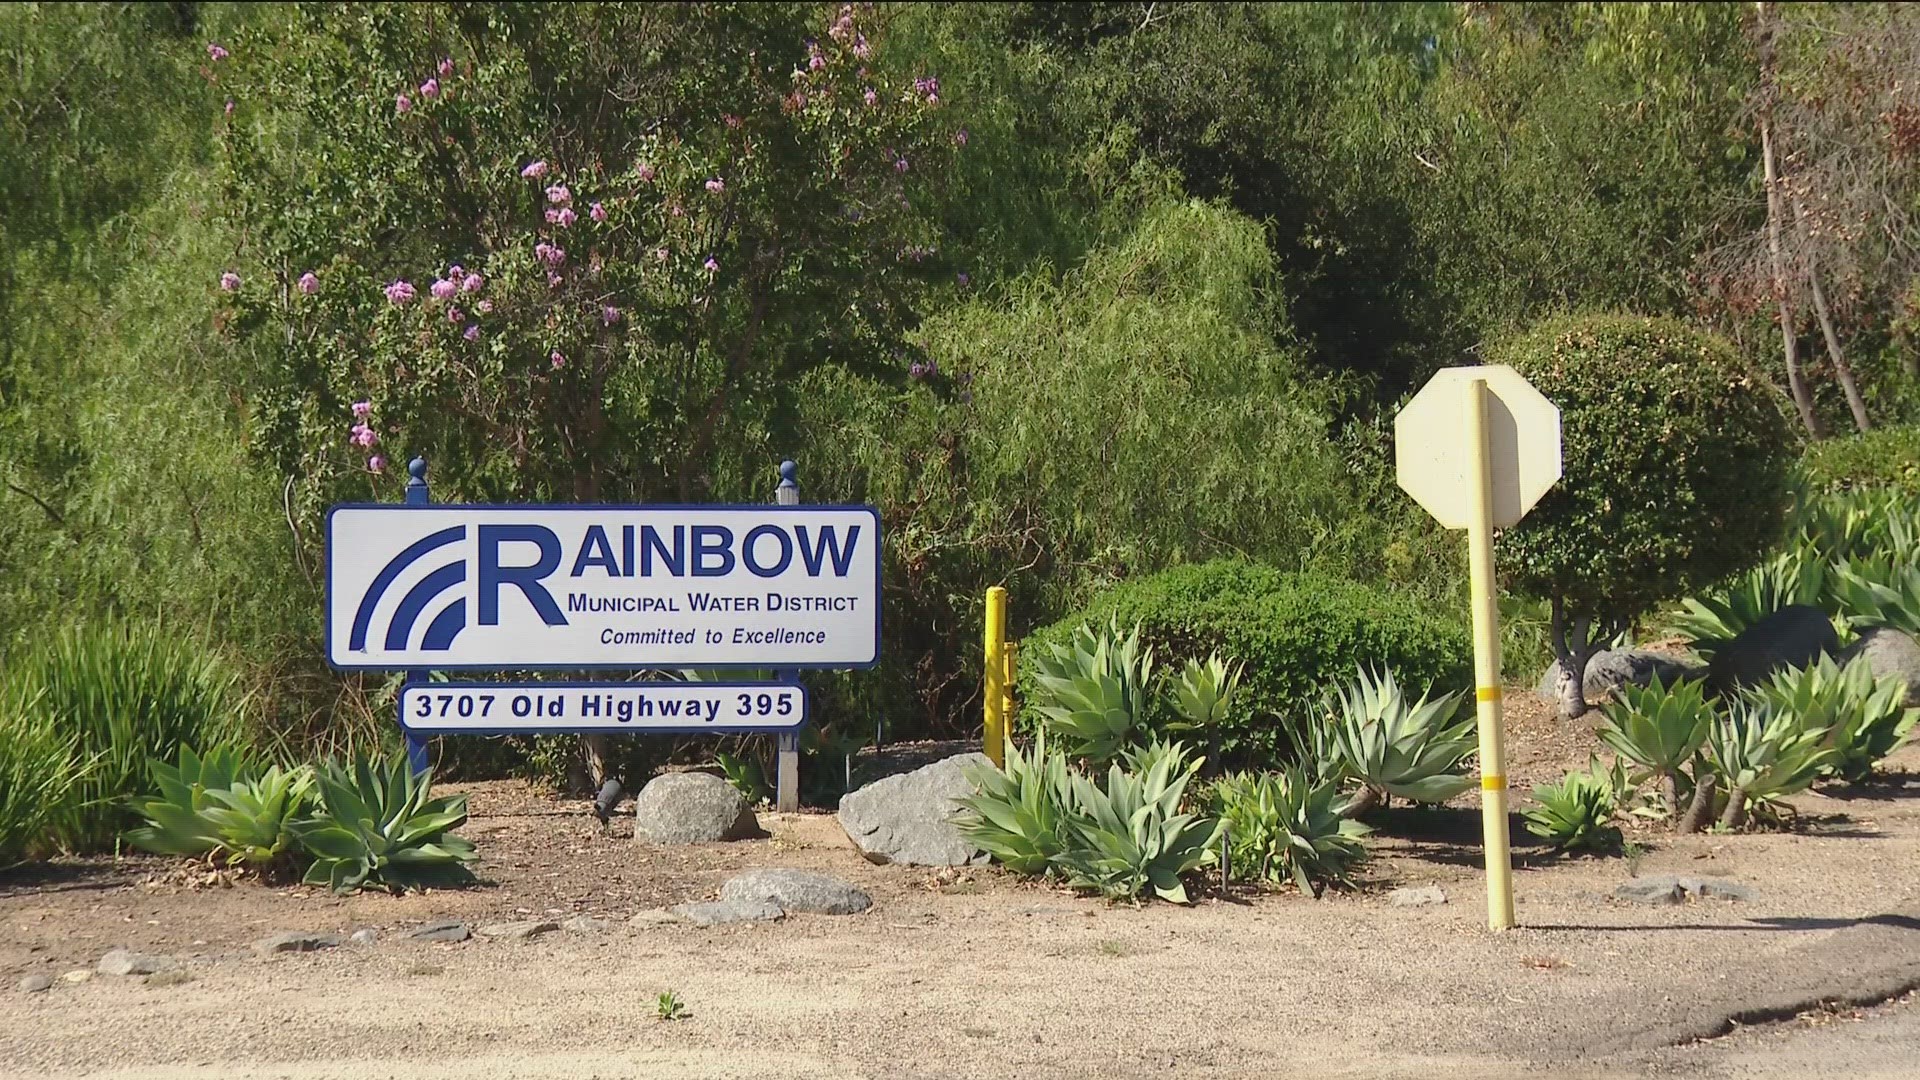 The Water Authority contends the departures will shift around $140 million in costs that the Rainbow and Fallbrook agencies would have paid.